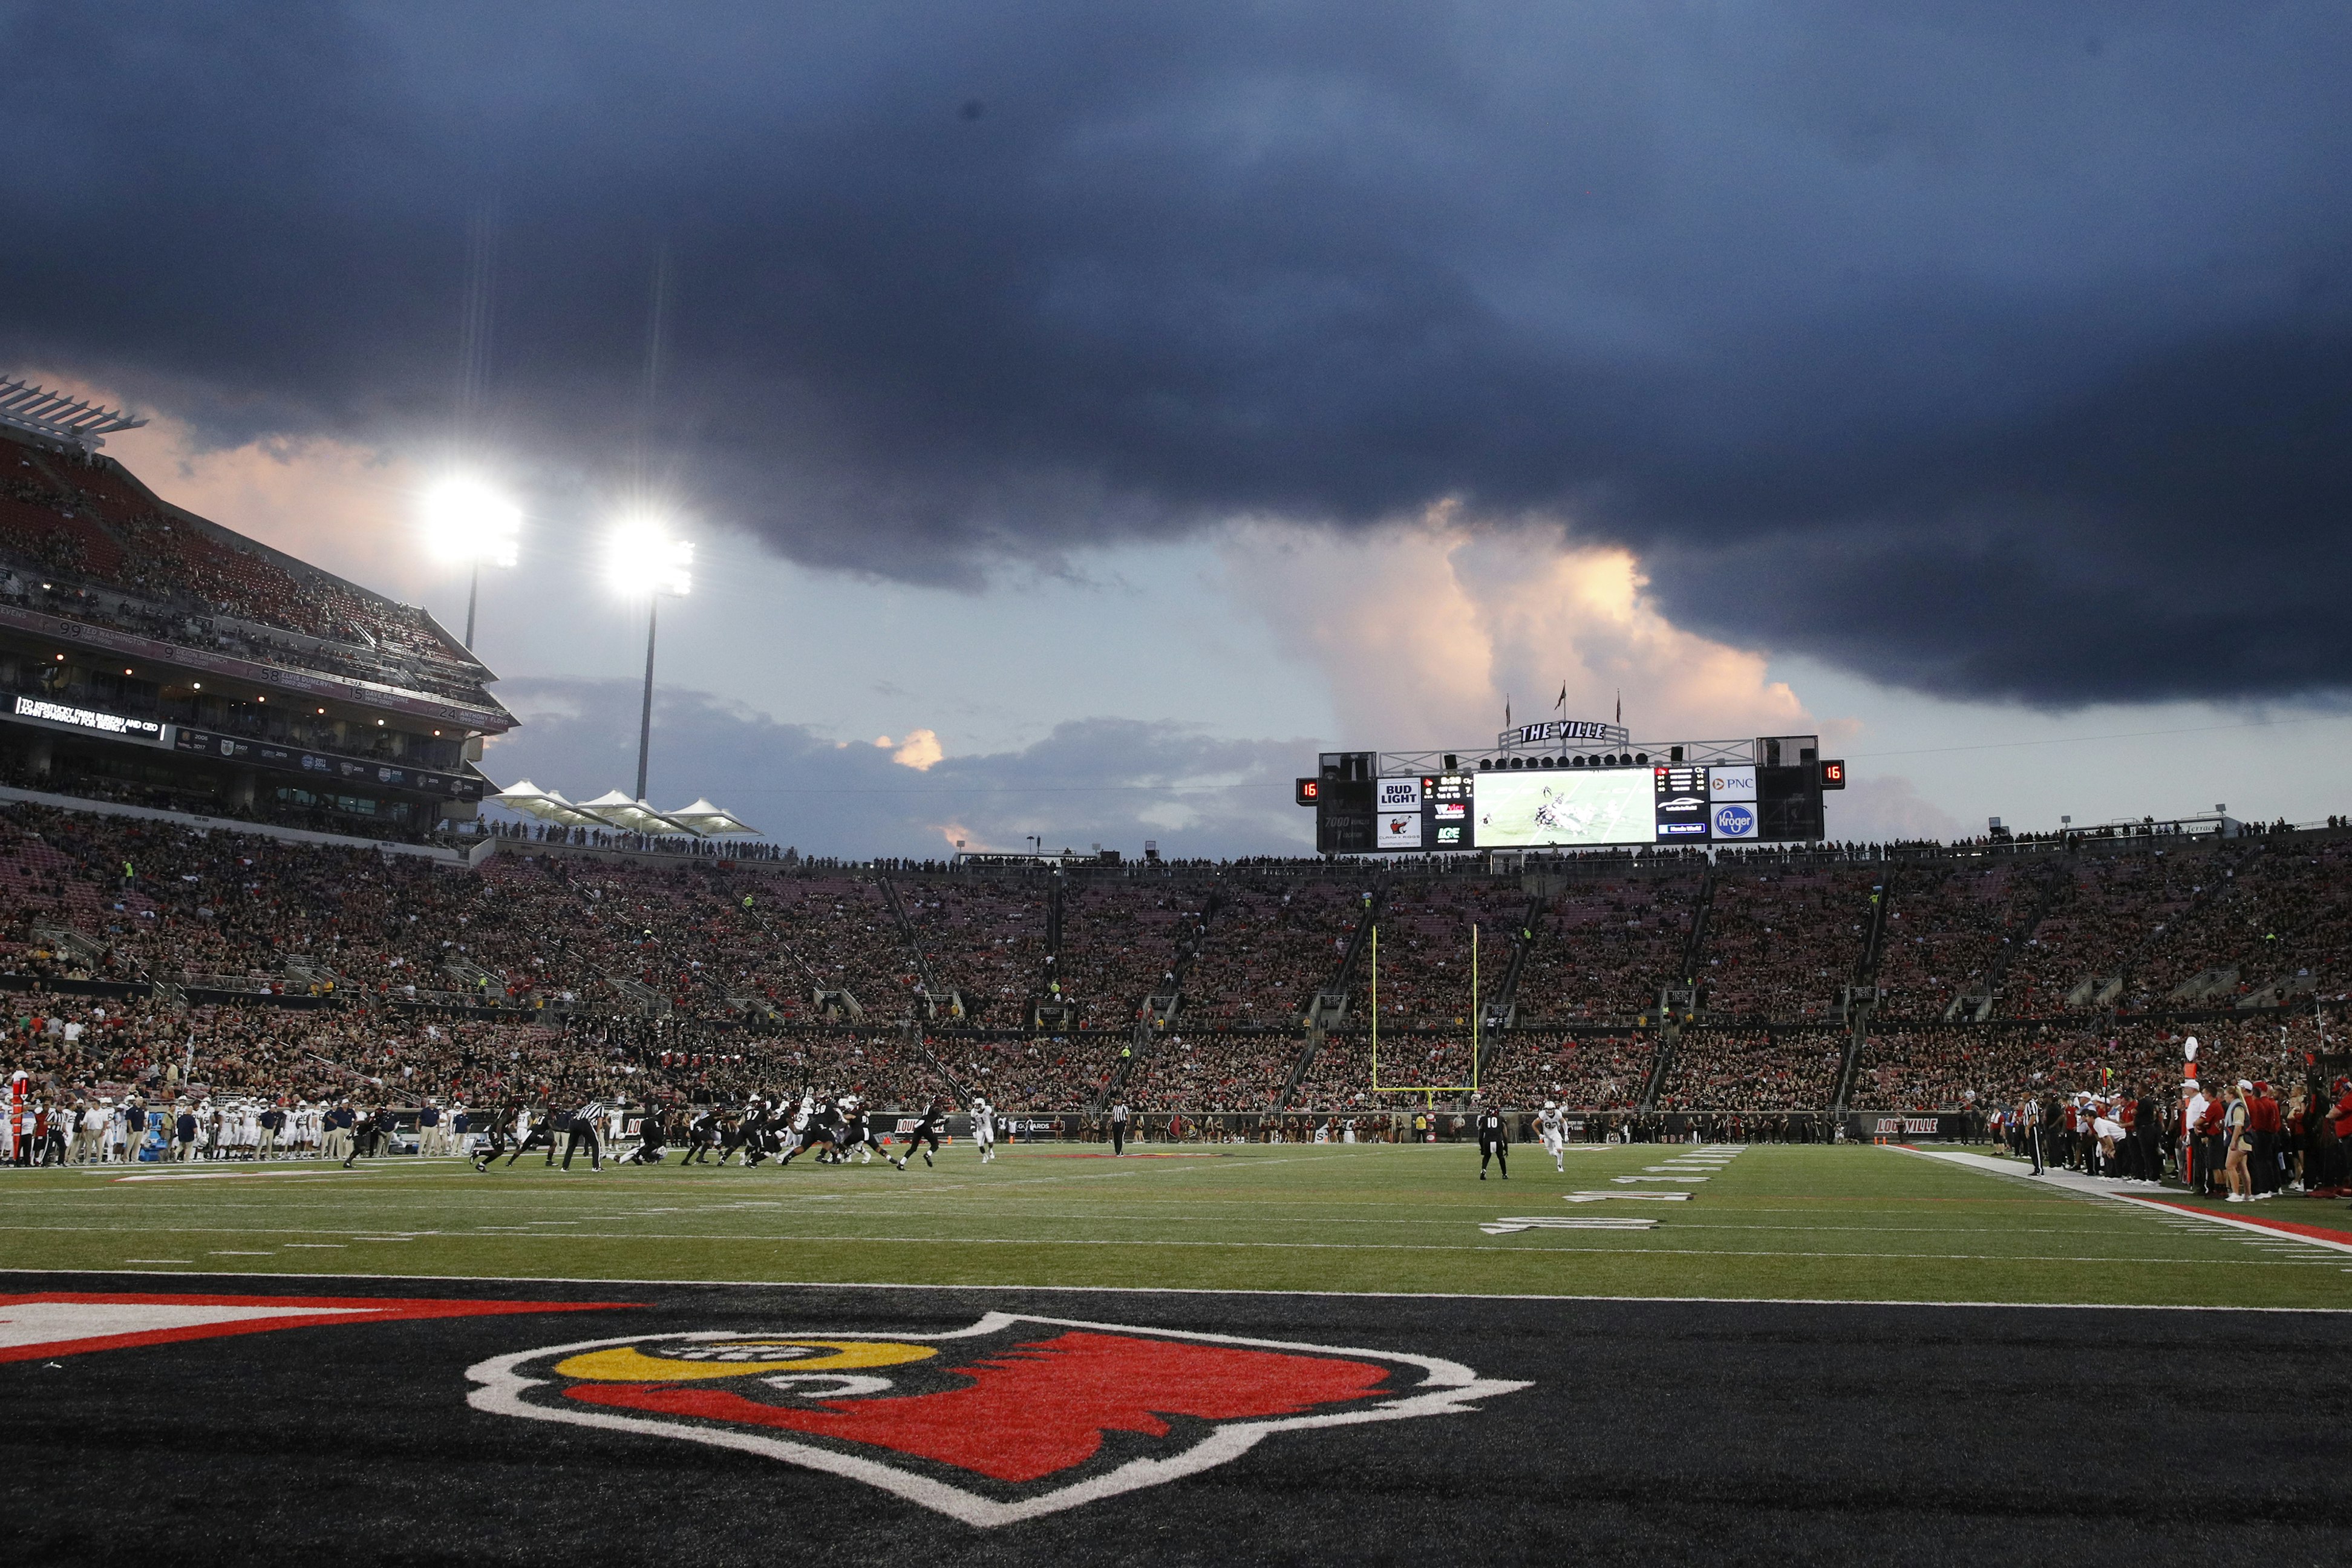 The foreground is taken up by the end zone of Cardinal Stadium, the turf painted black with a large red Cardinals logo appearing upside down tot the viewer. In the distance, players in black and white uniforms are in motion, and beyond them the stands full of fans. The sky over the stadium is blue with tall pink and grey cumulonimbus clouds overtaken by a huge black storm cloud hovering right over the stadium.